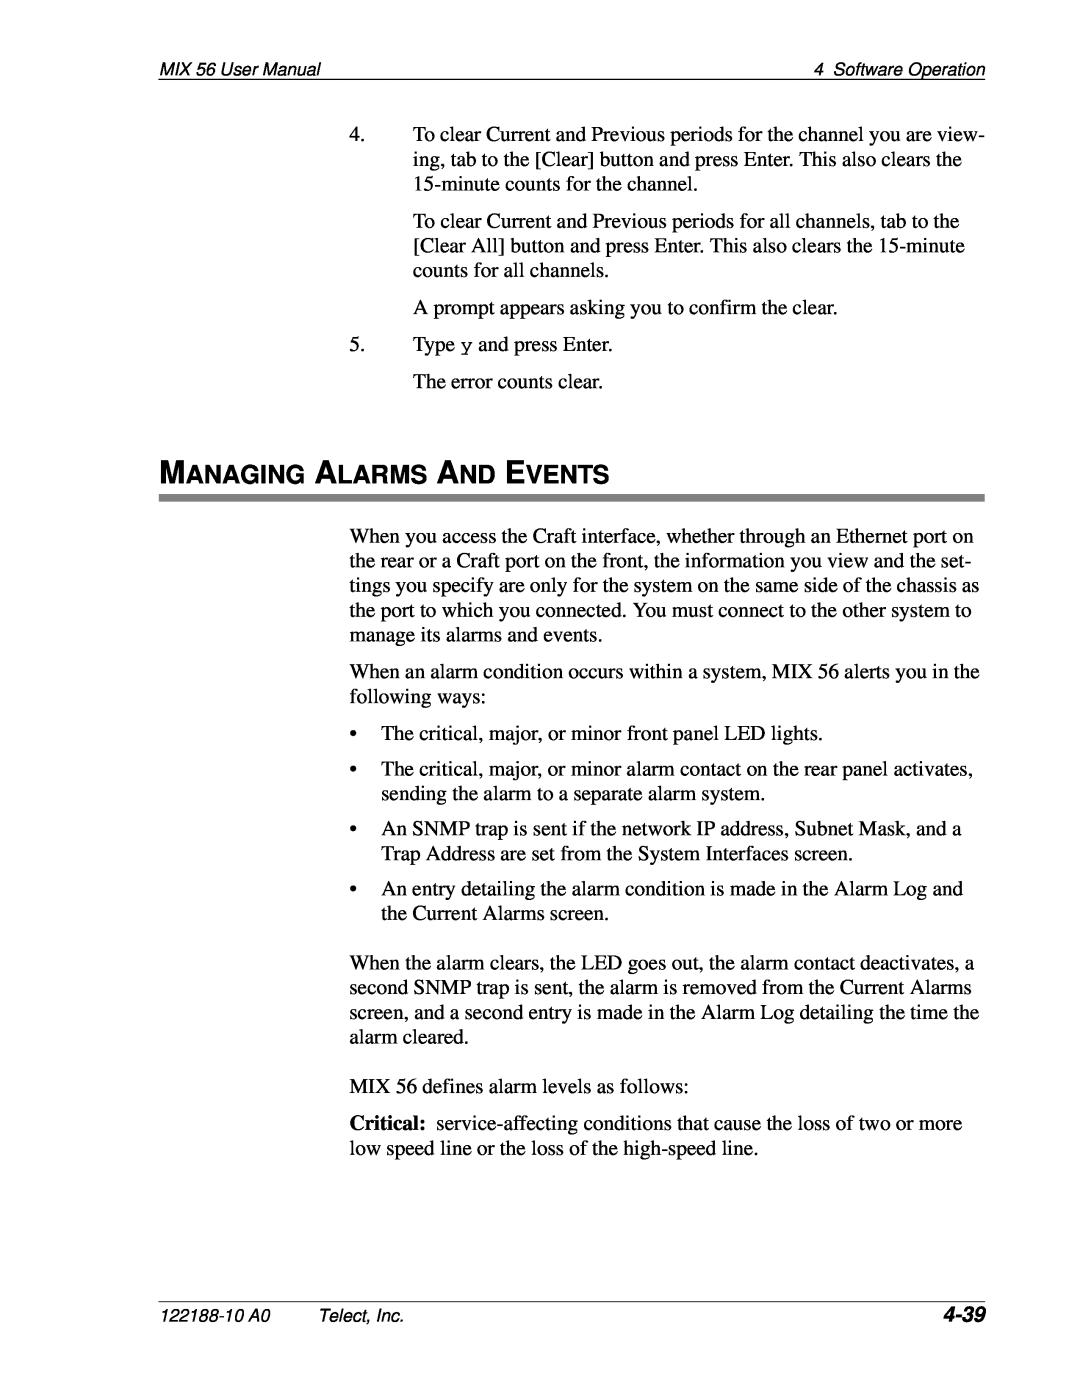 Telect MIX 56 user manual Managing Alarms And Events, 4-39 